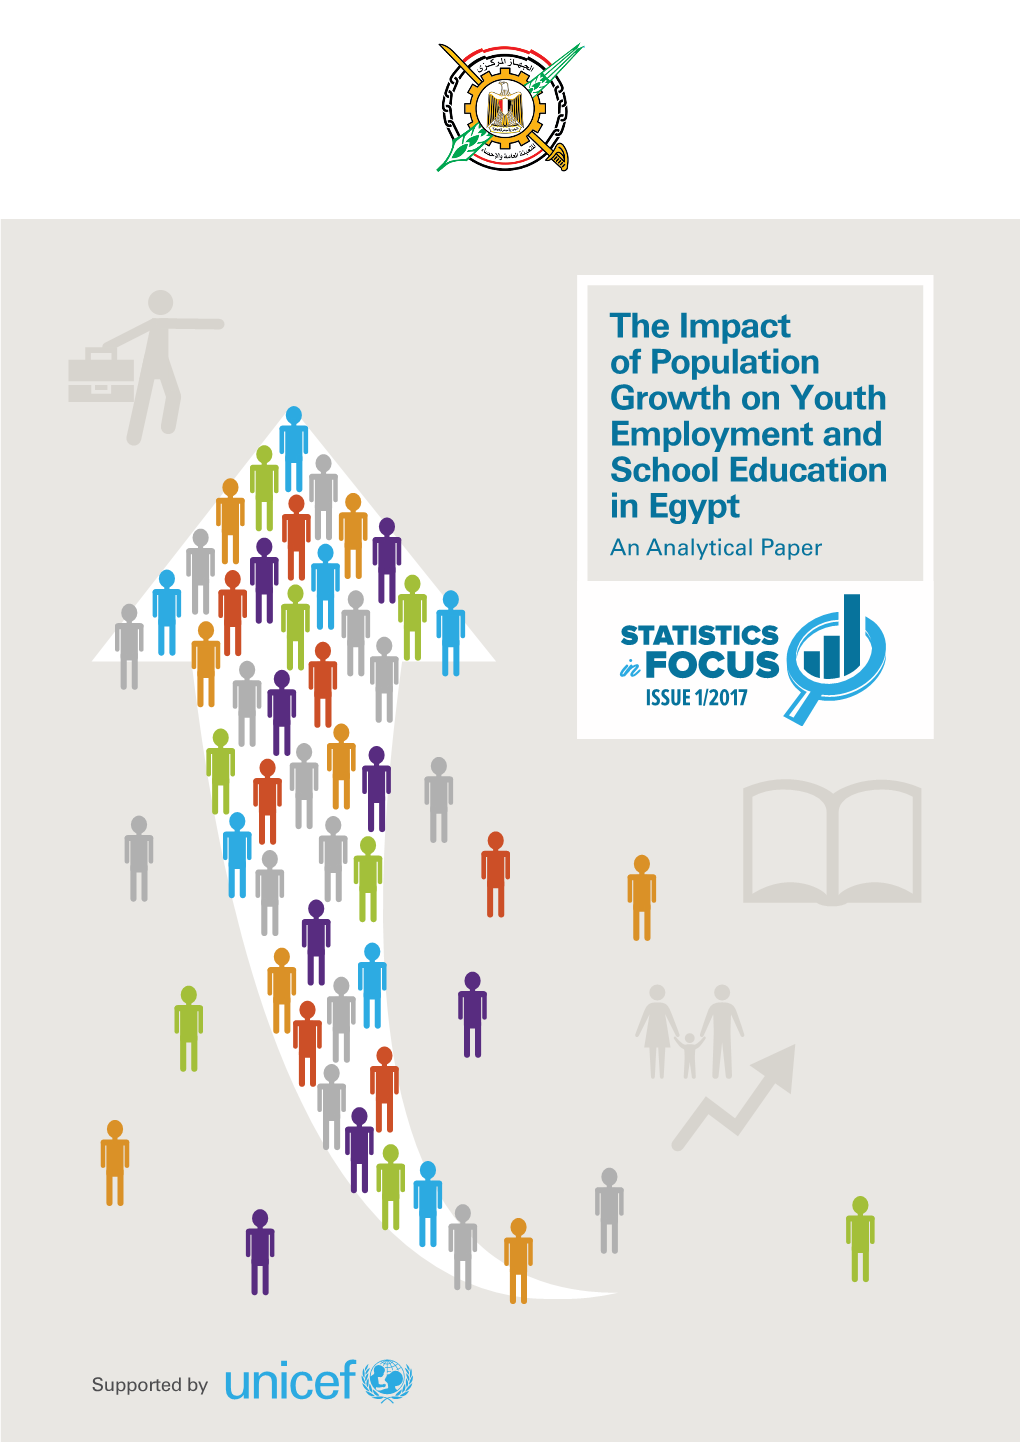 The Impact of Population Growth on Youth Employment and School Education in Egypt an Analytical Paper